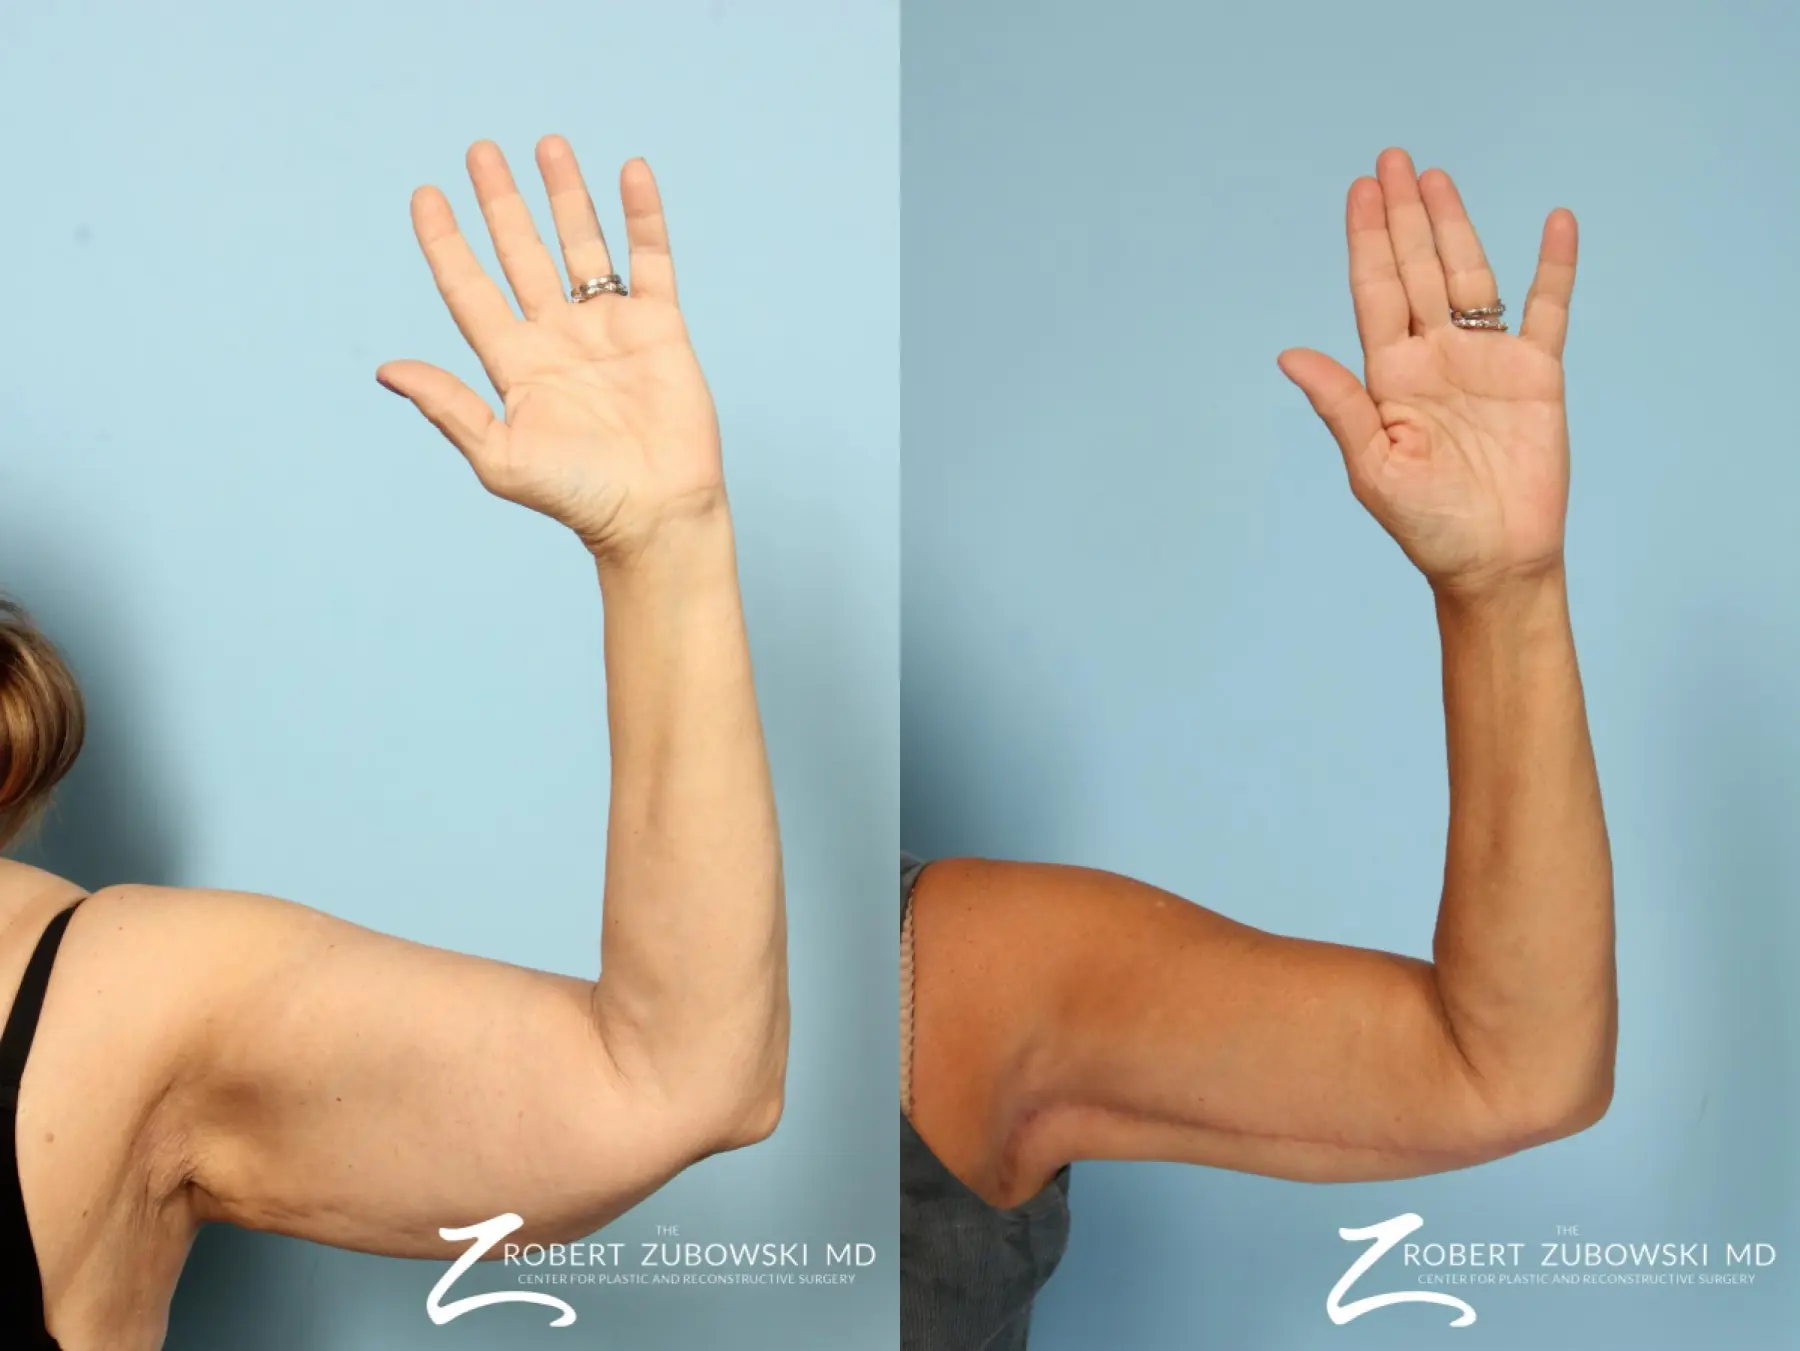 Arm Lift: Patient 4 - Before and After  